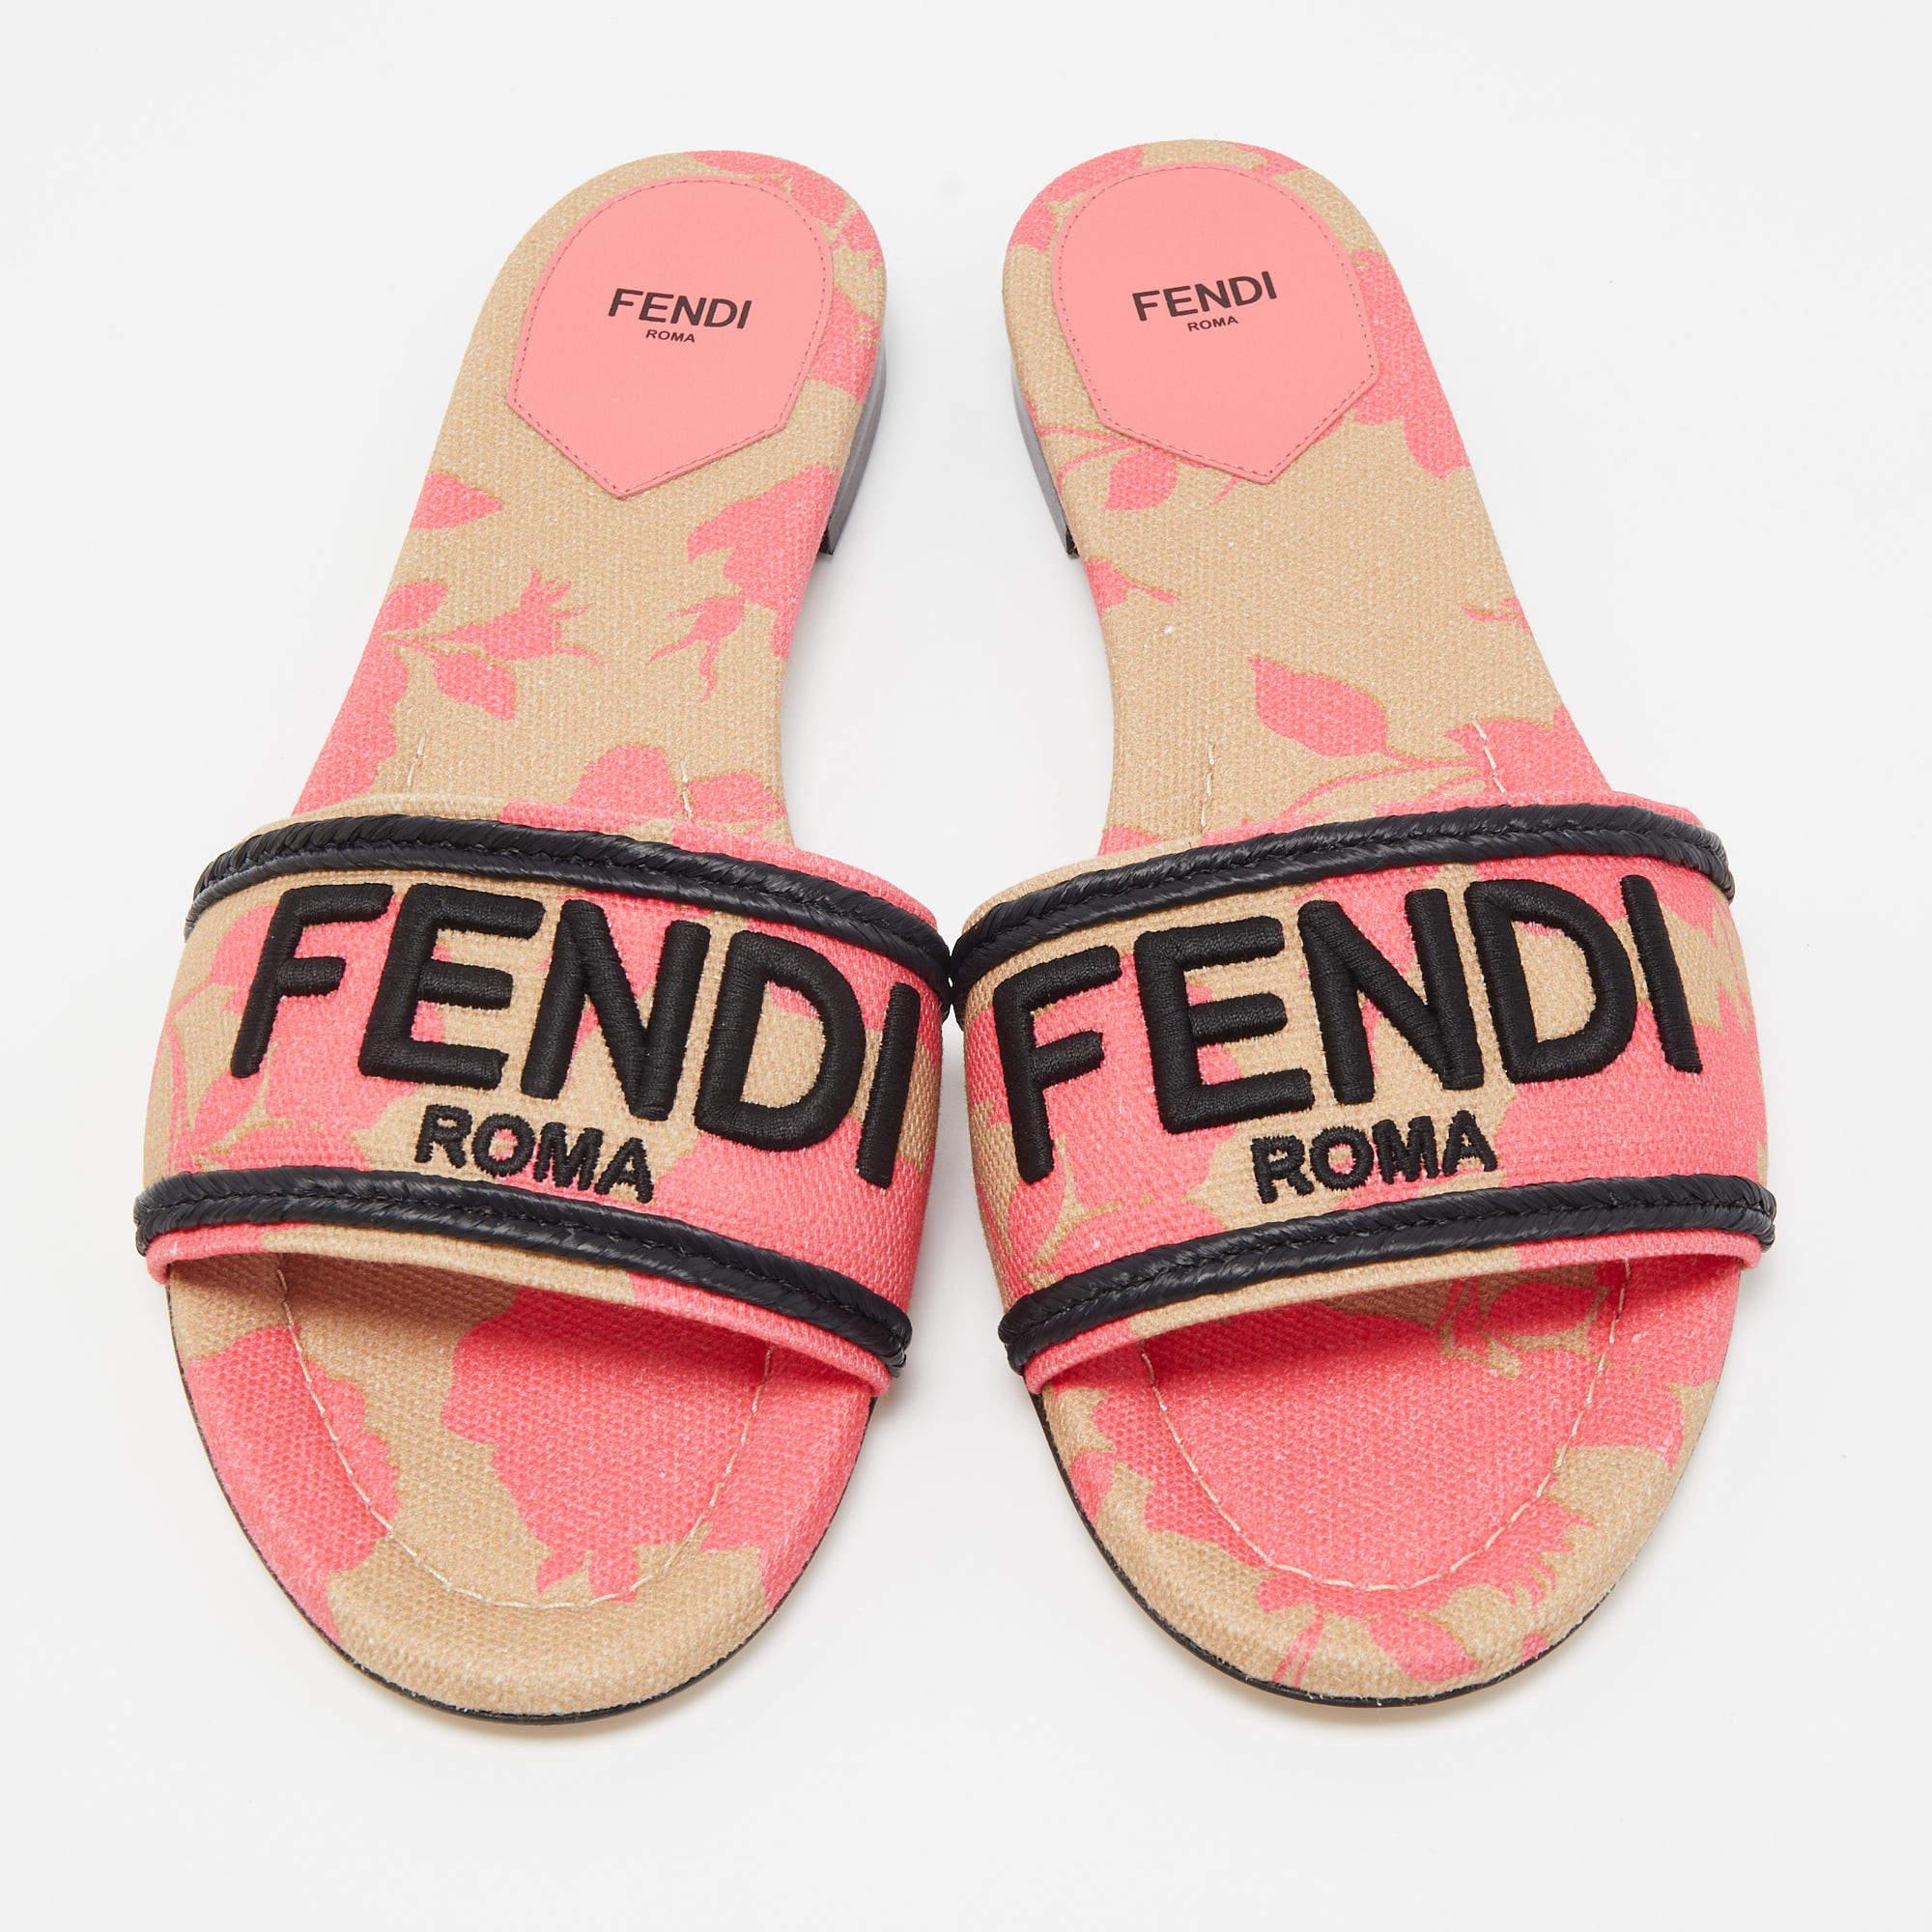 Frame your feet with these Fendi flat slides. Created using the best materials, the flats are perfect with short, midi, and maxi hemlines.

Includes: Original Dustbag, Original Box

